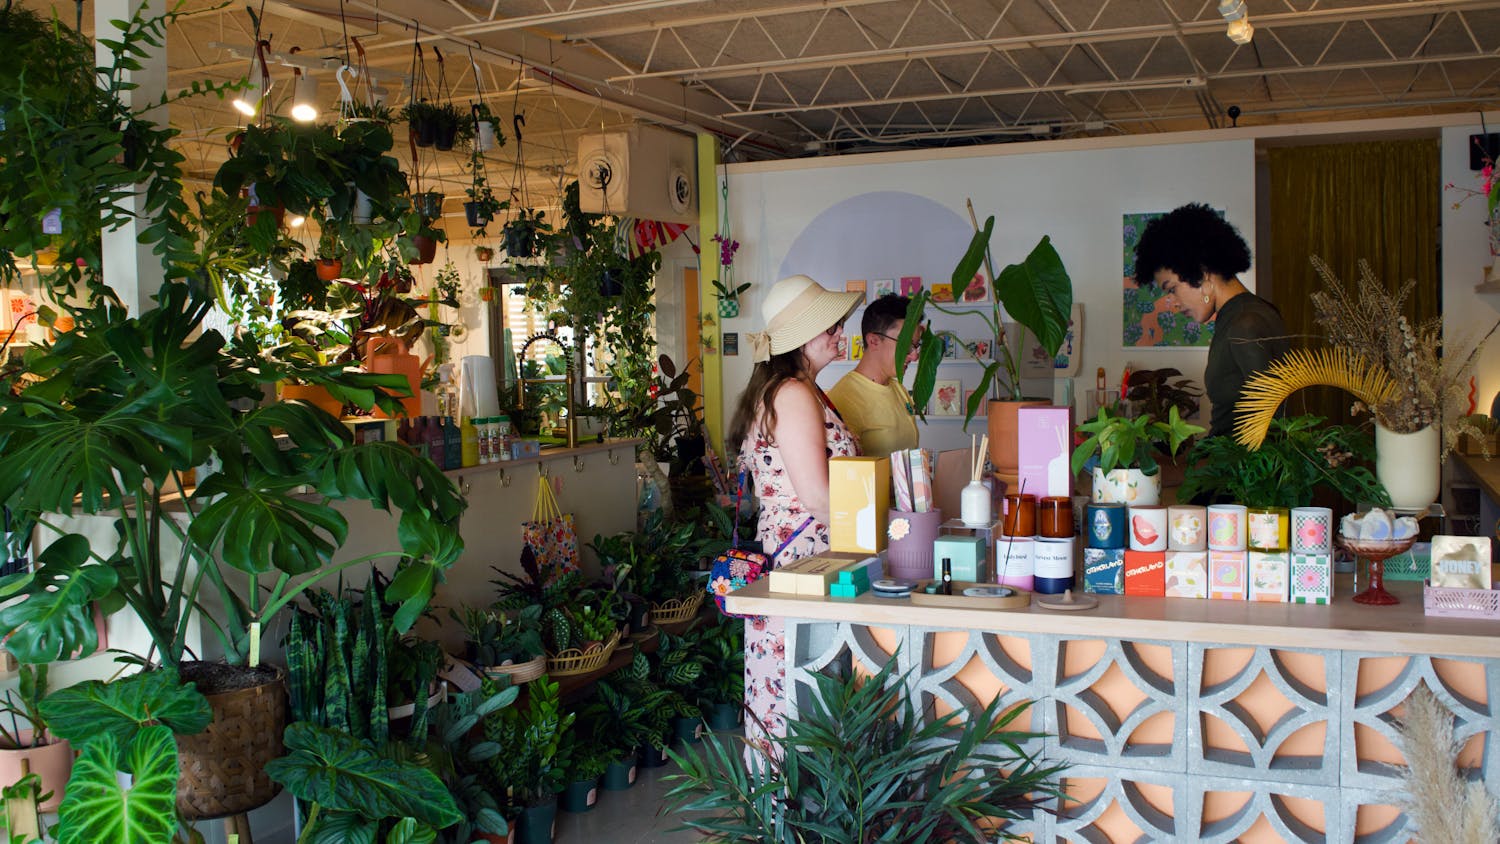 Customers browse the vast plant selection at Serpentine Plants + Provisions Friday, Feb. 17, 2023.